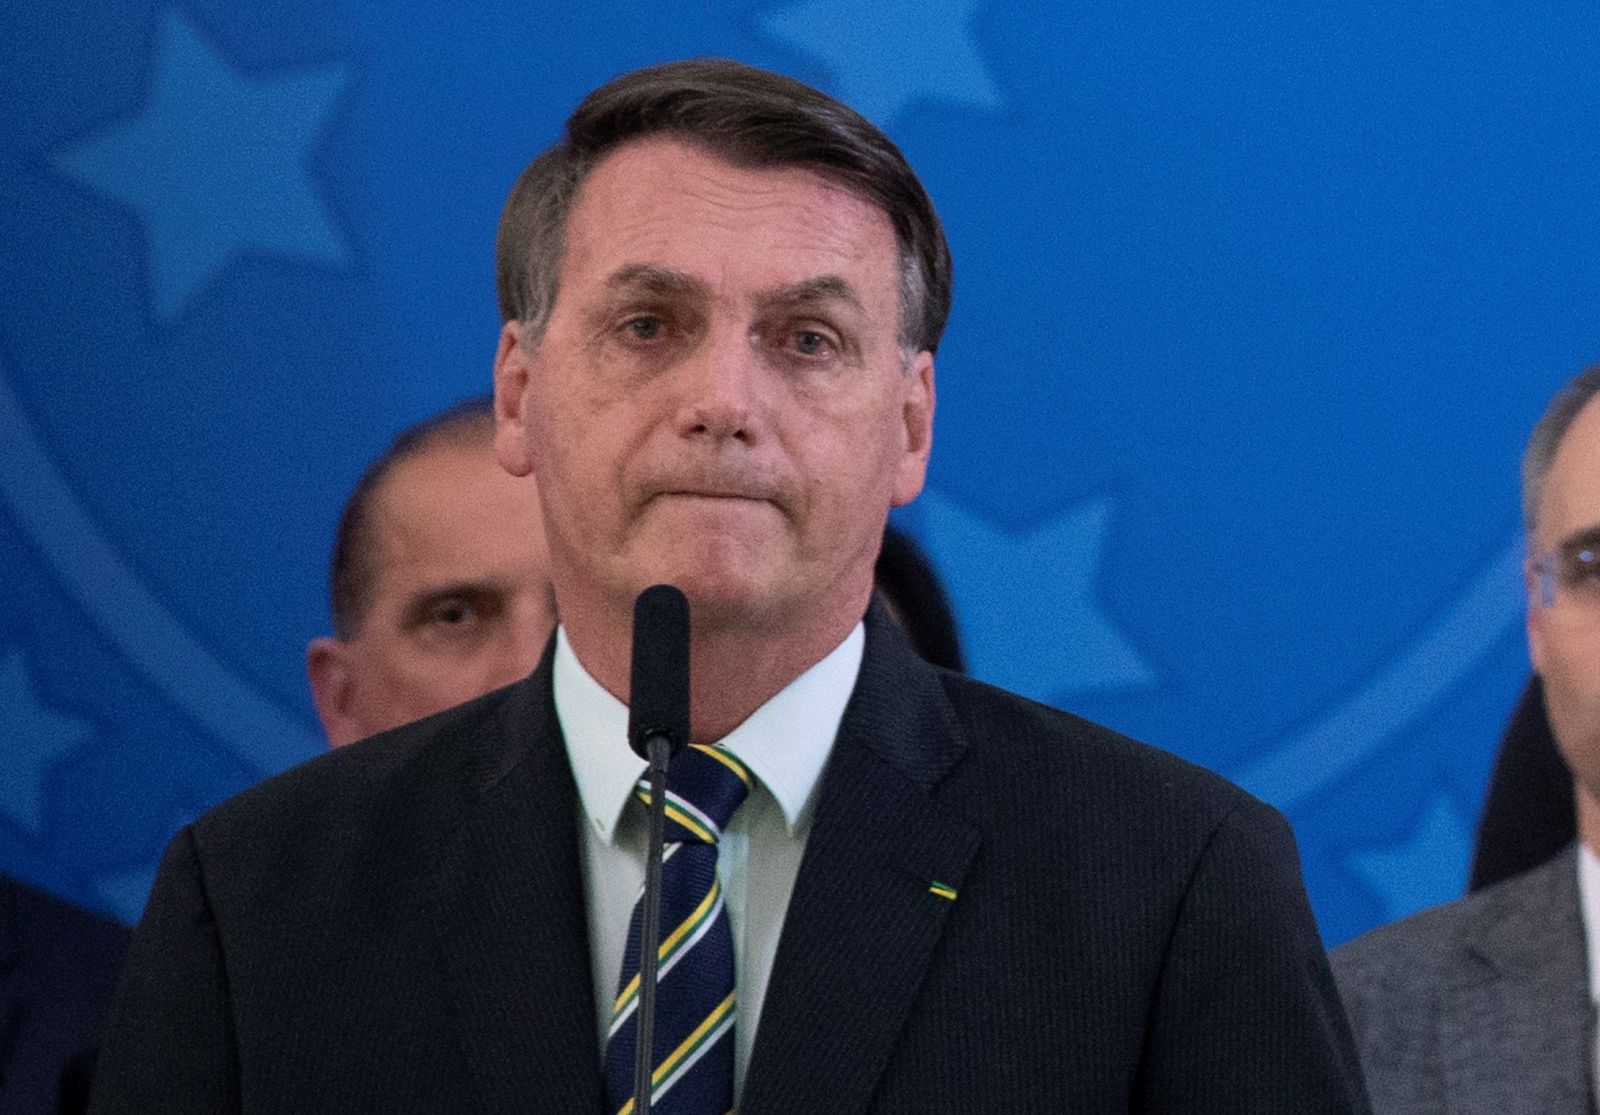 epa09107315 Brazilian President Jair Bolsonaro (L) takes part in a Government event along with with the then-new Minister of Justice Andre Luiz de Almeida Mendonca (R) in Brasilia, Brazil, 24 April 2020 (reissued 30 March 2021). President Bolsonaro on 30 March 2021 appointed Alemida Mendonca as new Attorney General. Bolsonaro on the previous day replaced six cabinet ministers in the biggest cabinet reshuffle since he took office.  EPA/Joédson Alves